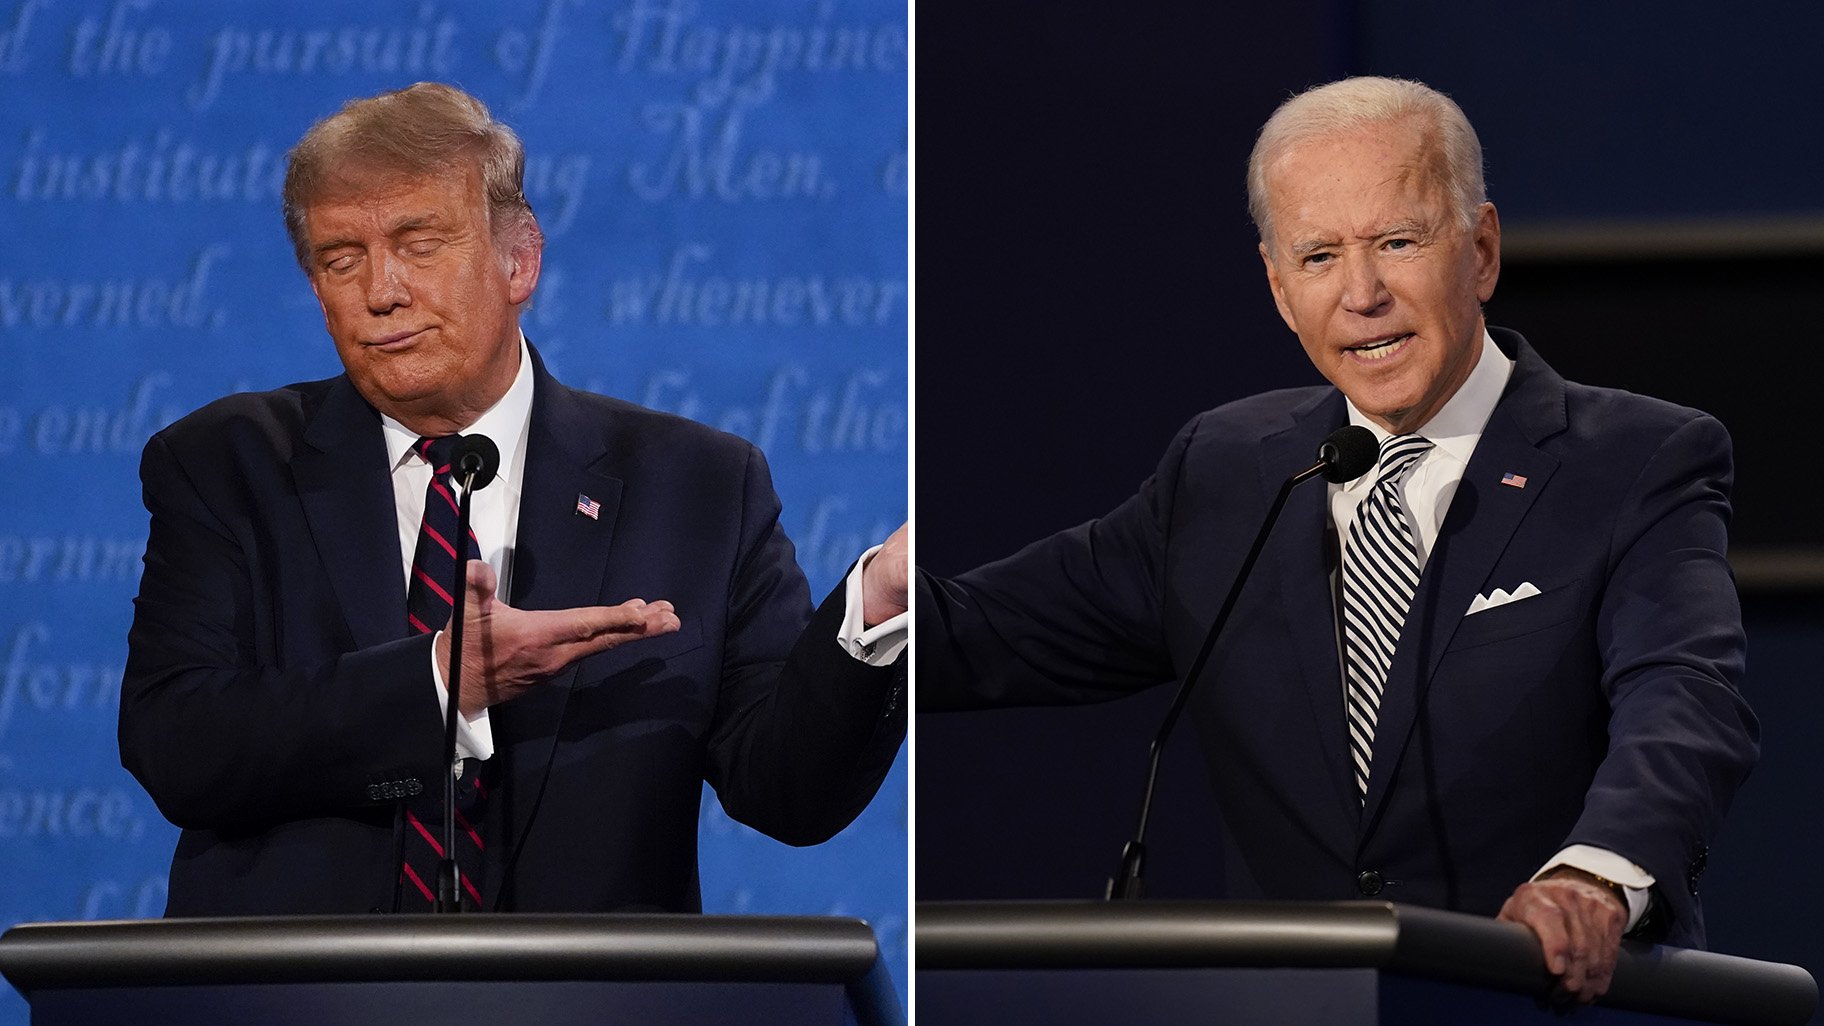 Debate Takeaways: An Acrid Tone From the Opening Minute | Chicago News | WTTW